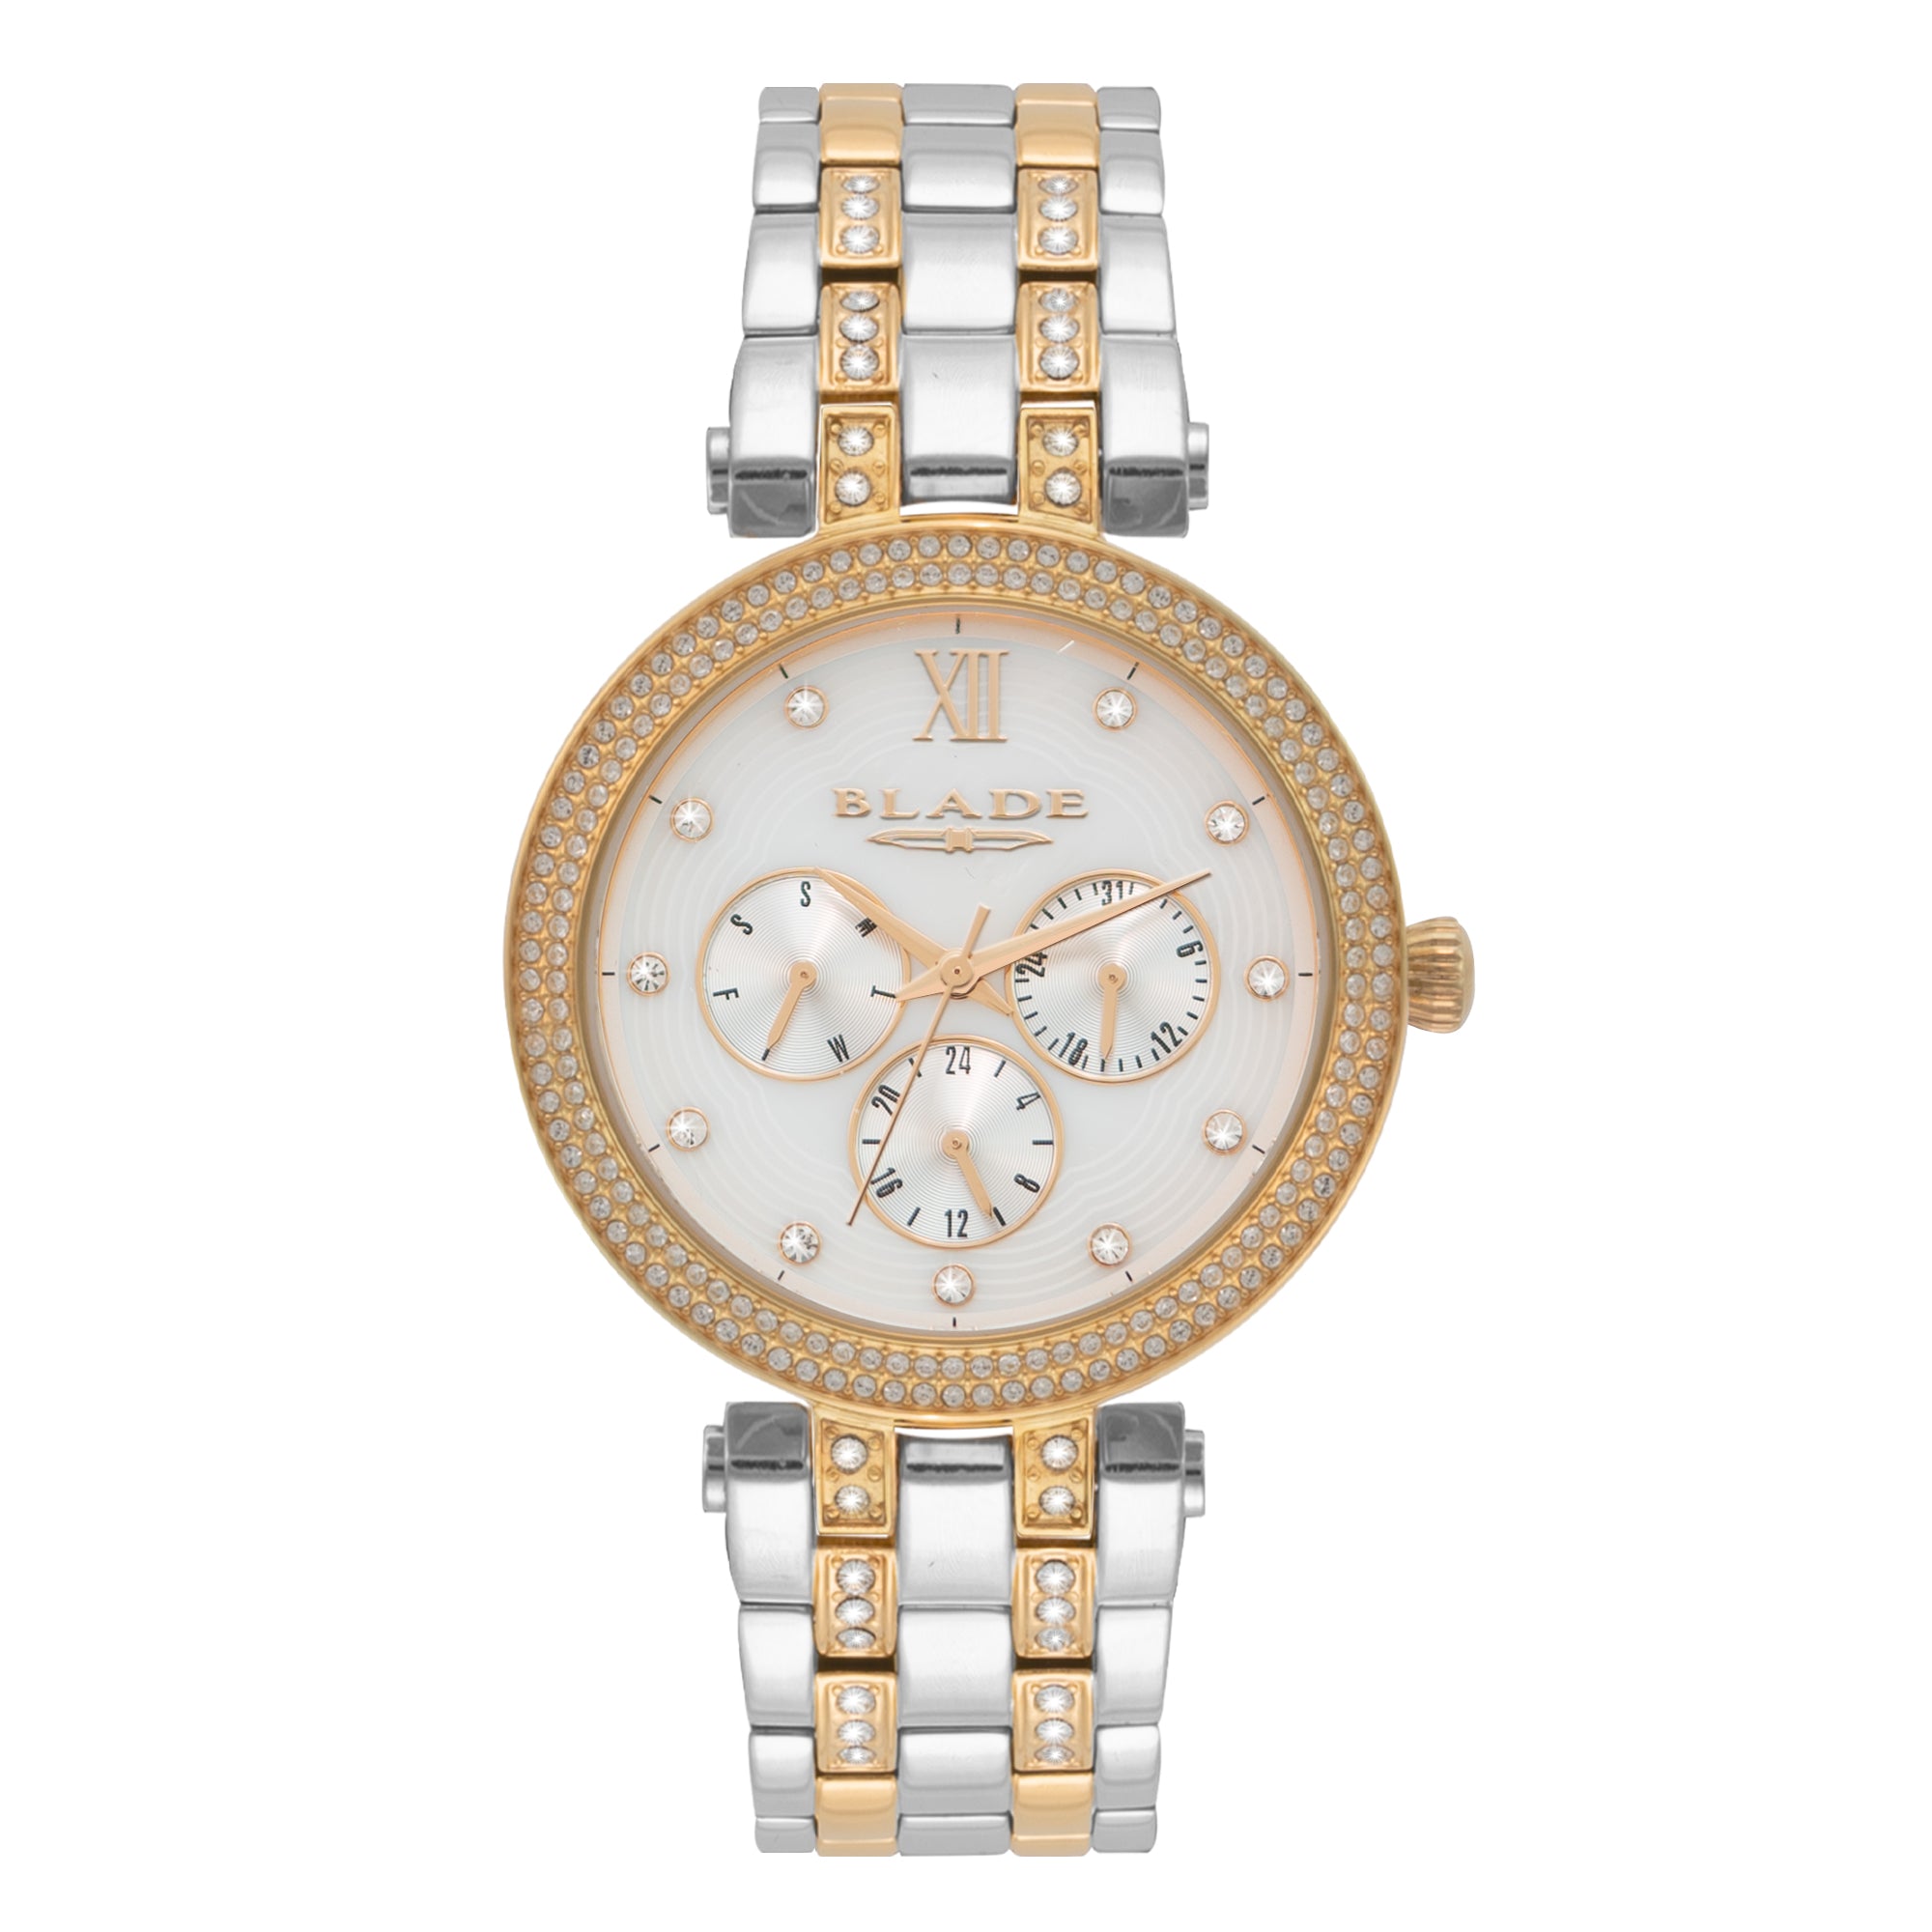 BLADE Dazzle Coral 3632L2UHU SS Women's Watch - Front